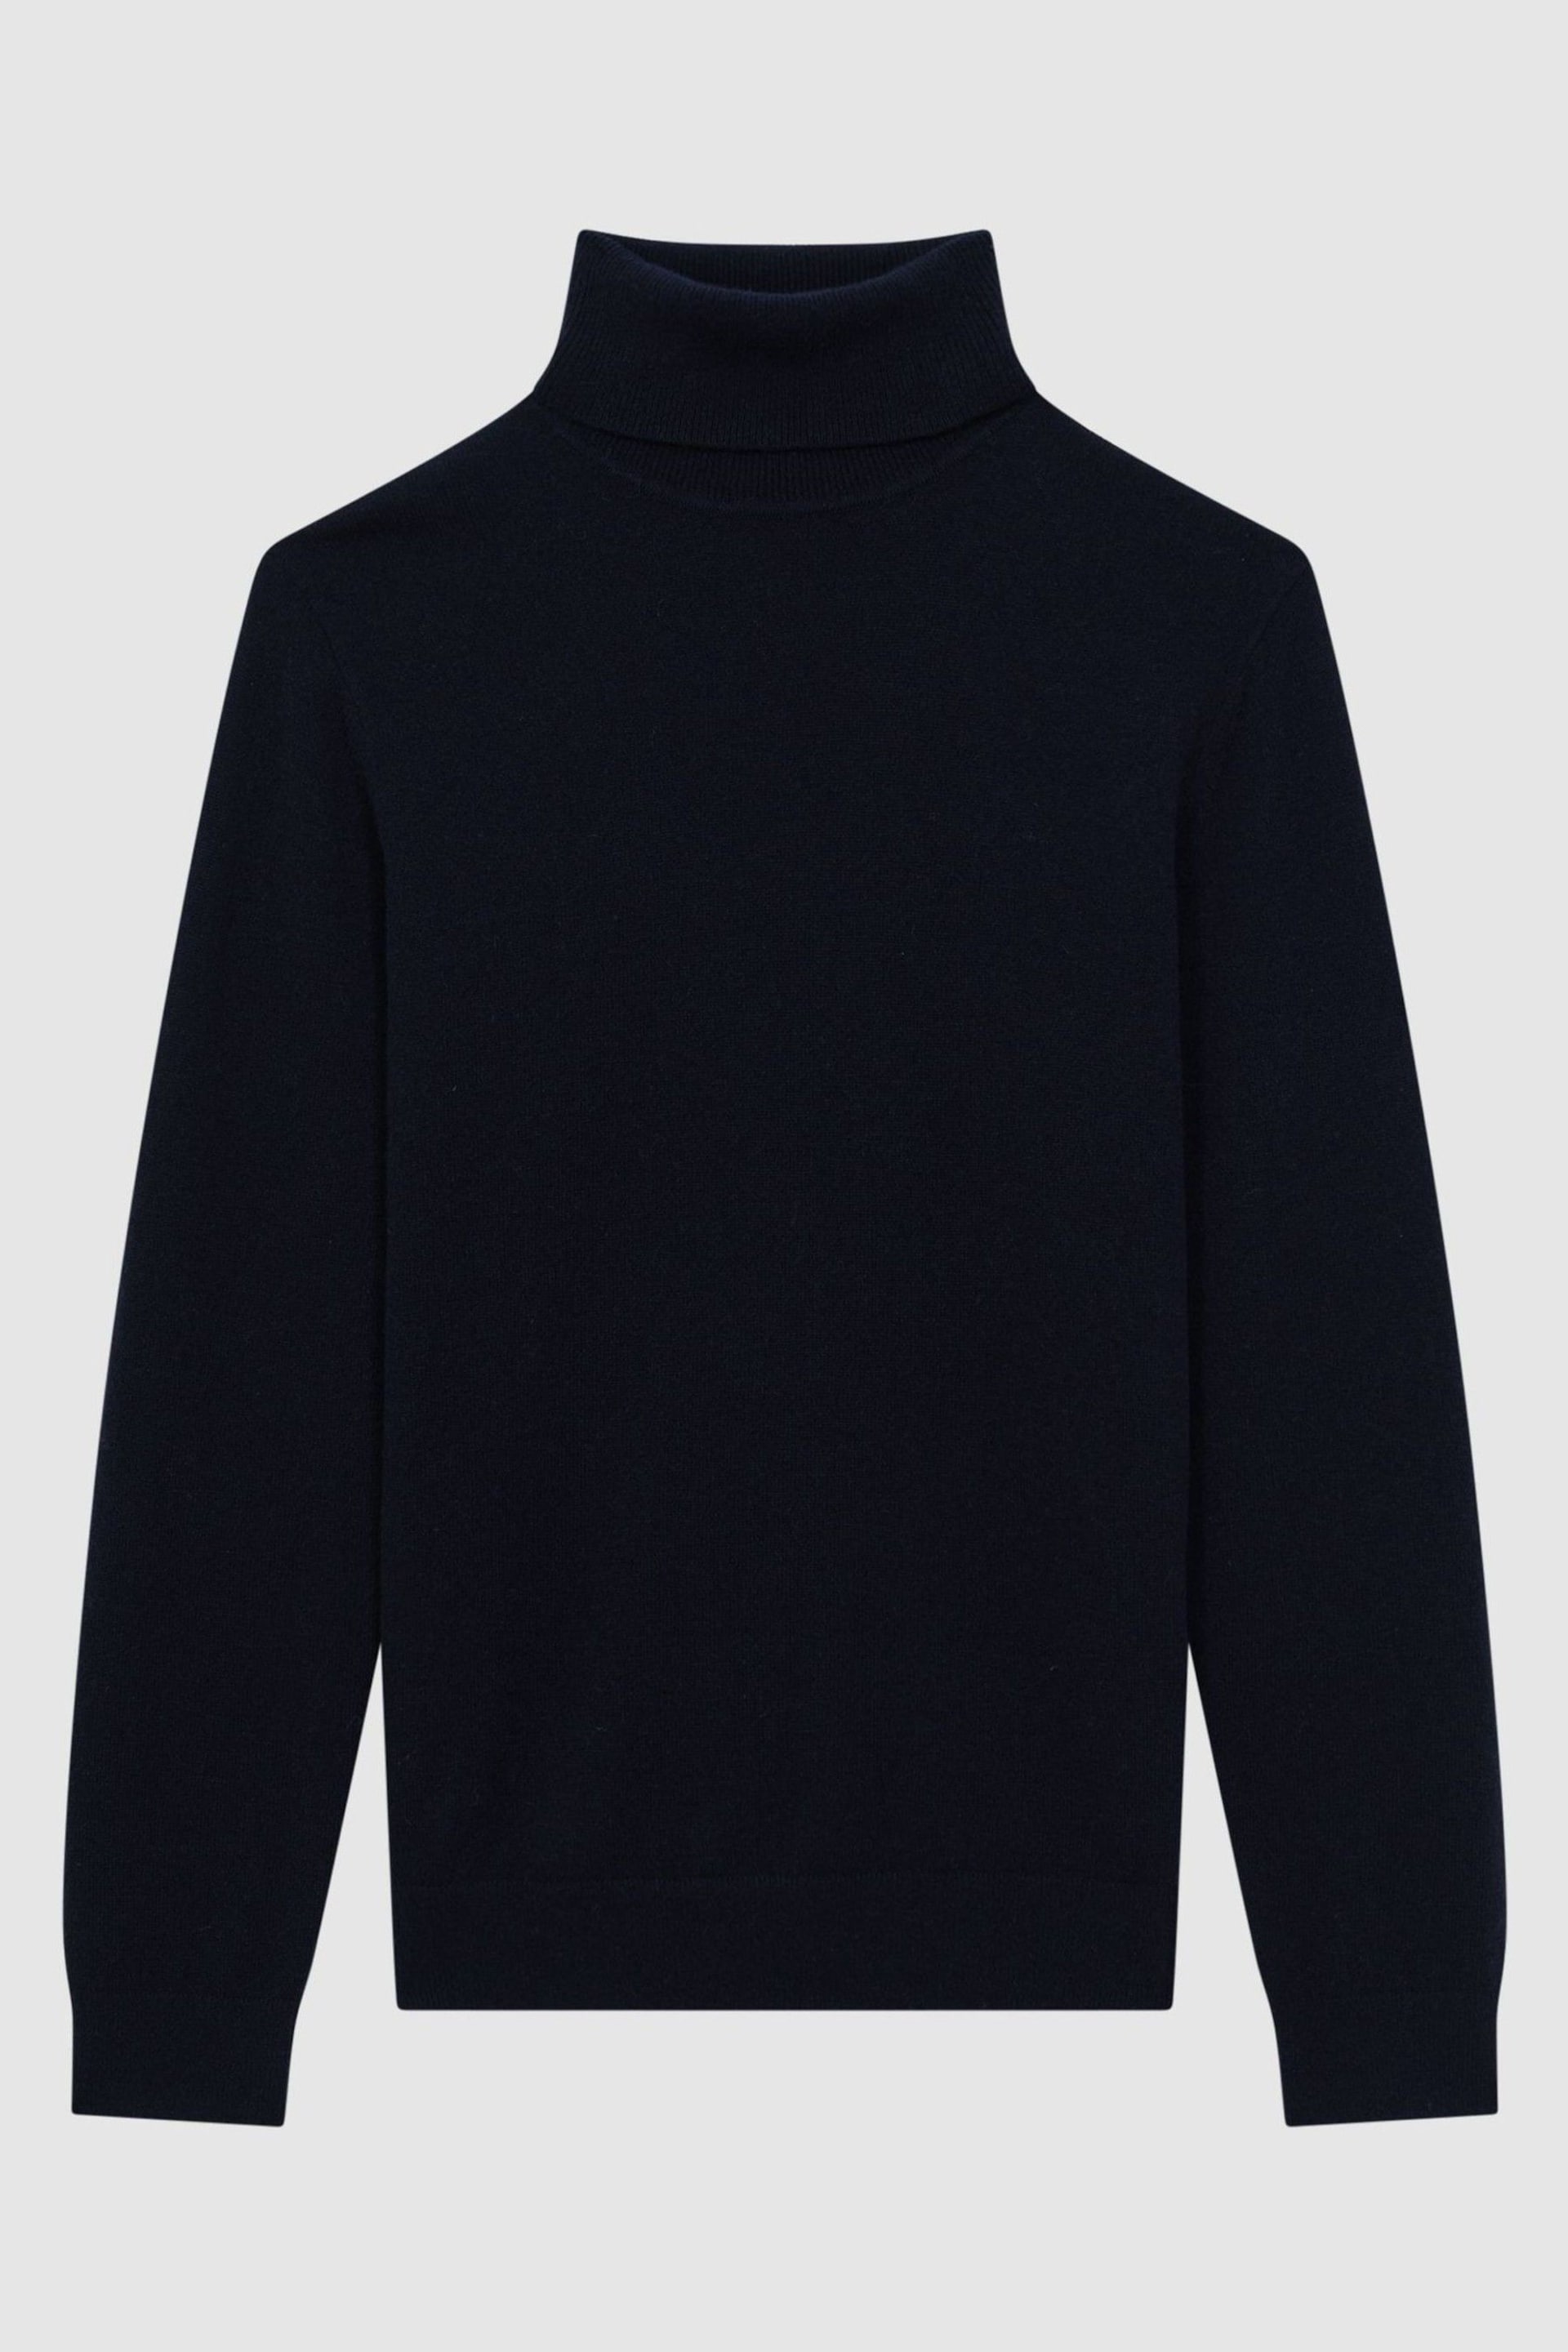 Reiss Navy Regal Cashmere Roll Neck Jumper - Image 2 of 6